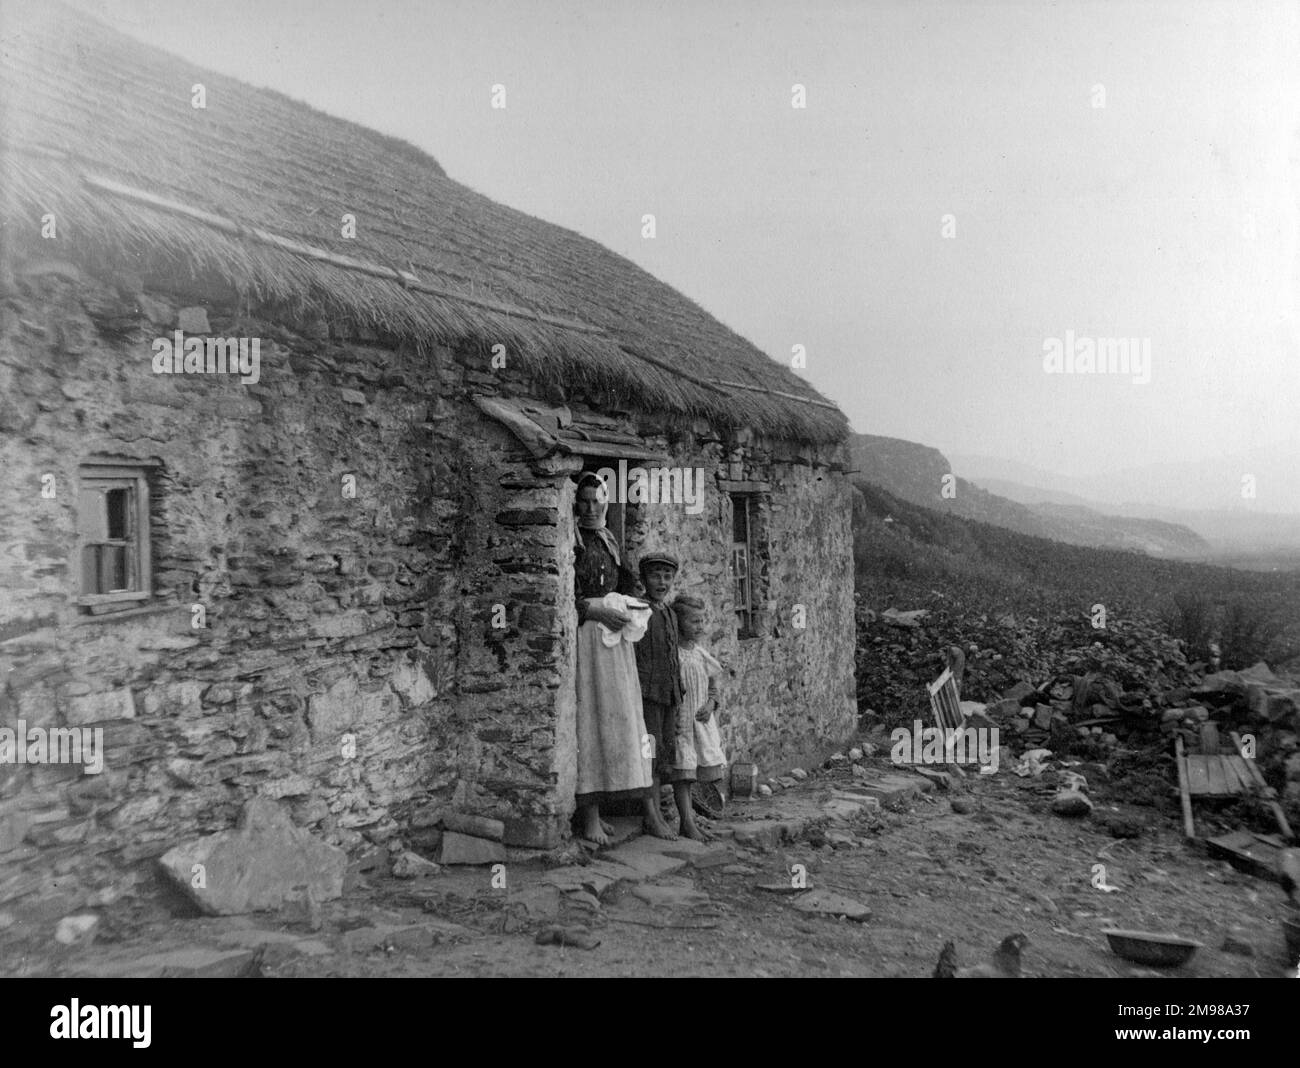 Cottage in Glen Columbkille (Glencolmcille, Gleann Cholm Cille), County Donegal, north-west Ireland.  A woman with embroidery in her hands stands at the door with two children. Stock Photo